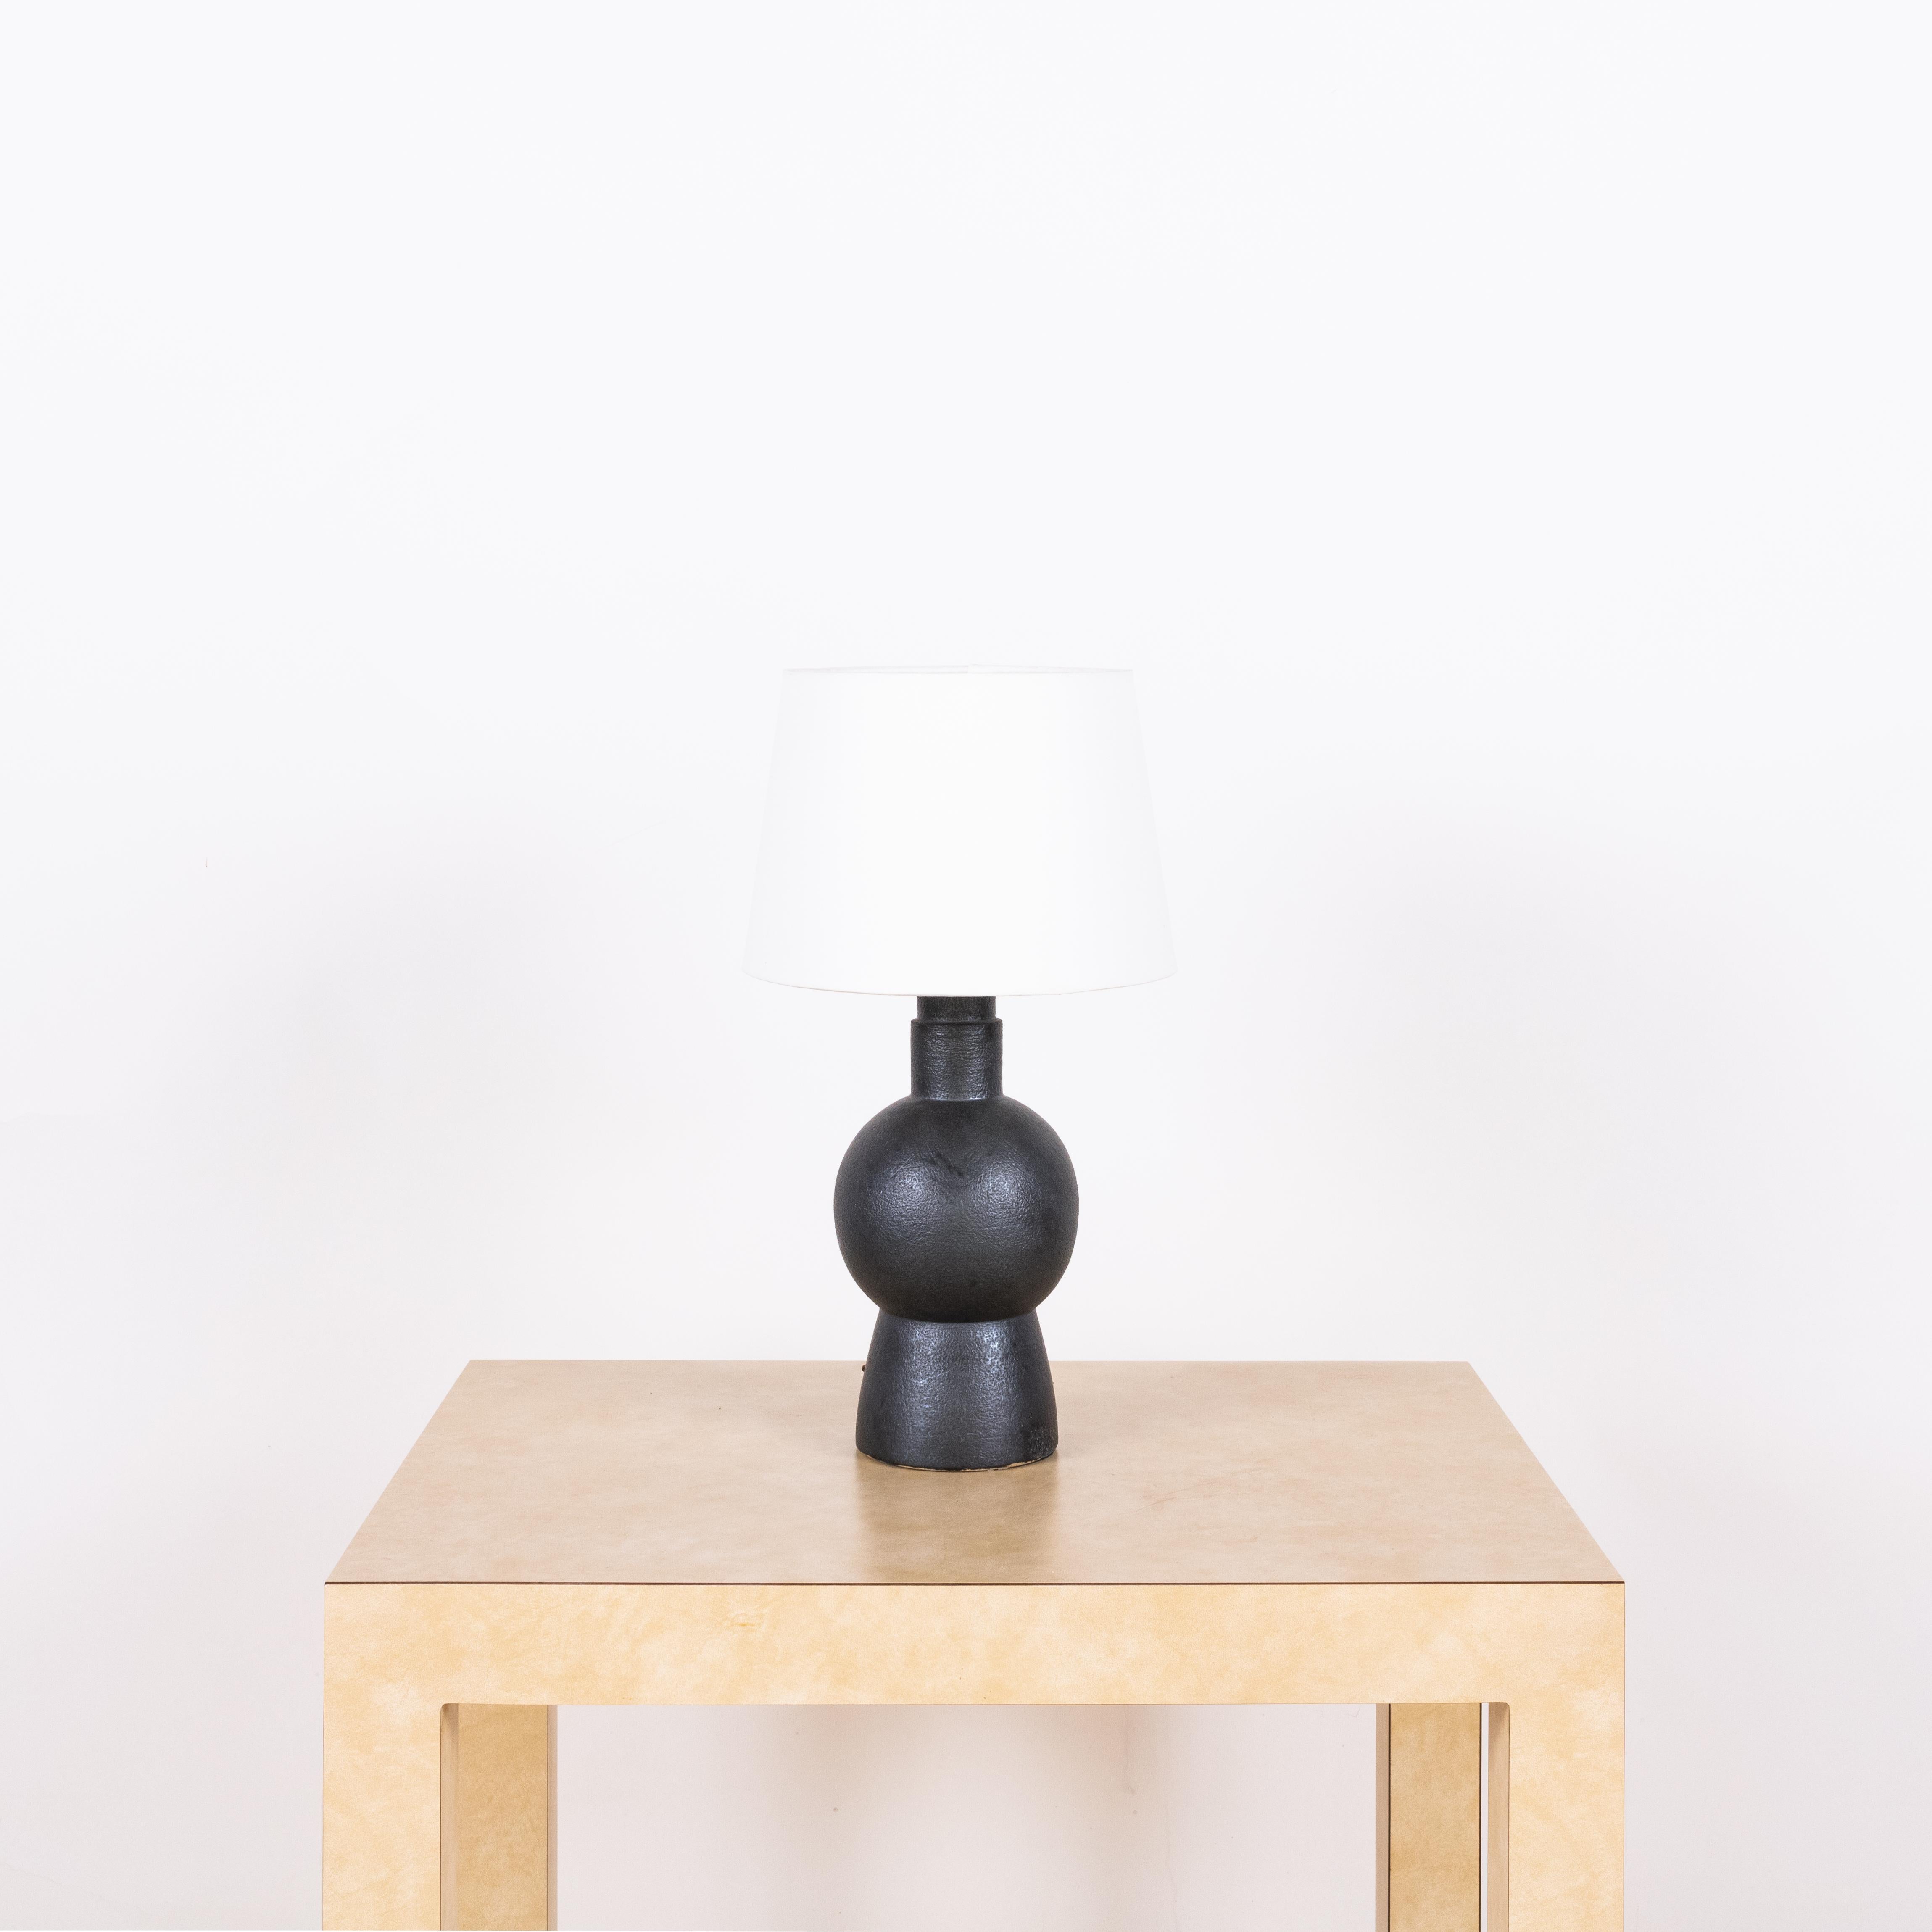 Black 'Bilboquet' stoneware lamp by Design Frères.

Dimensions listed (10 in. diameter x 18 in. tall) are the overall dimensions of the lamp plus the shade (as pictured). The lamp base is 11 in. tall and the shade is 7 in. tall.